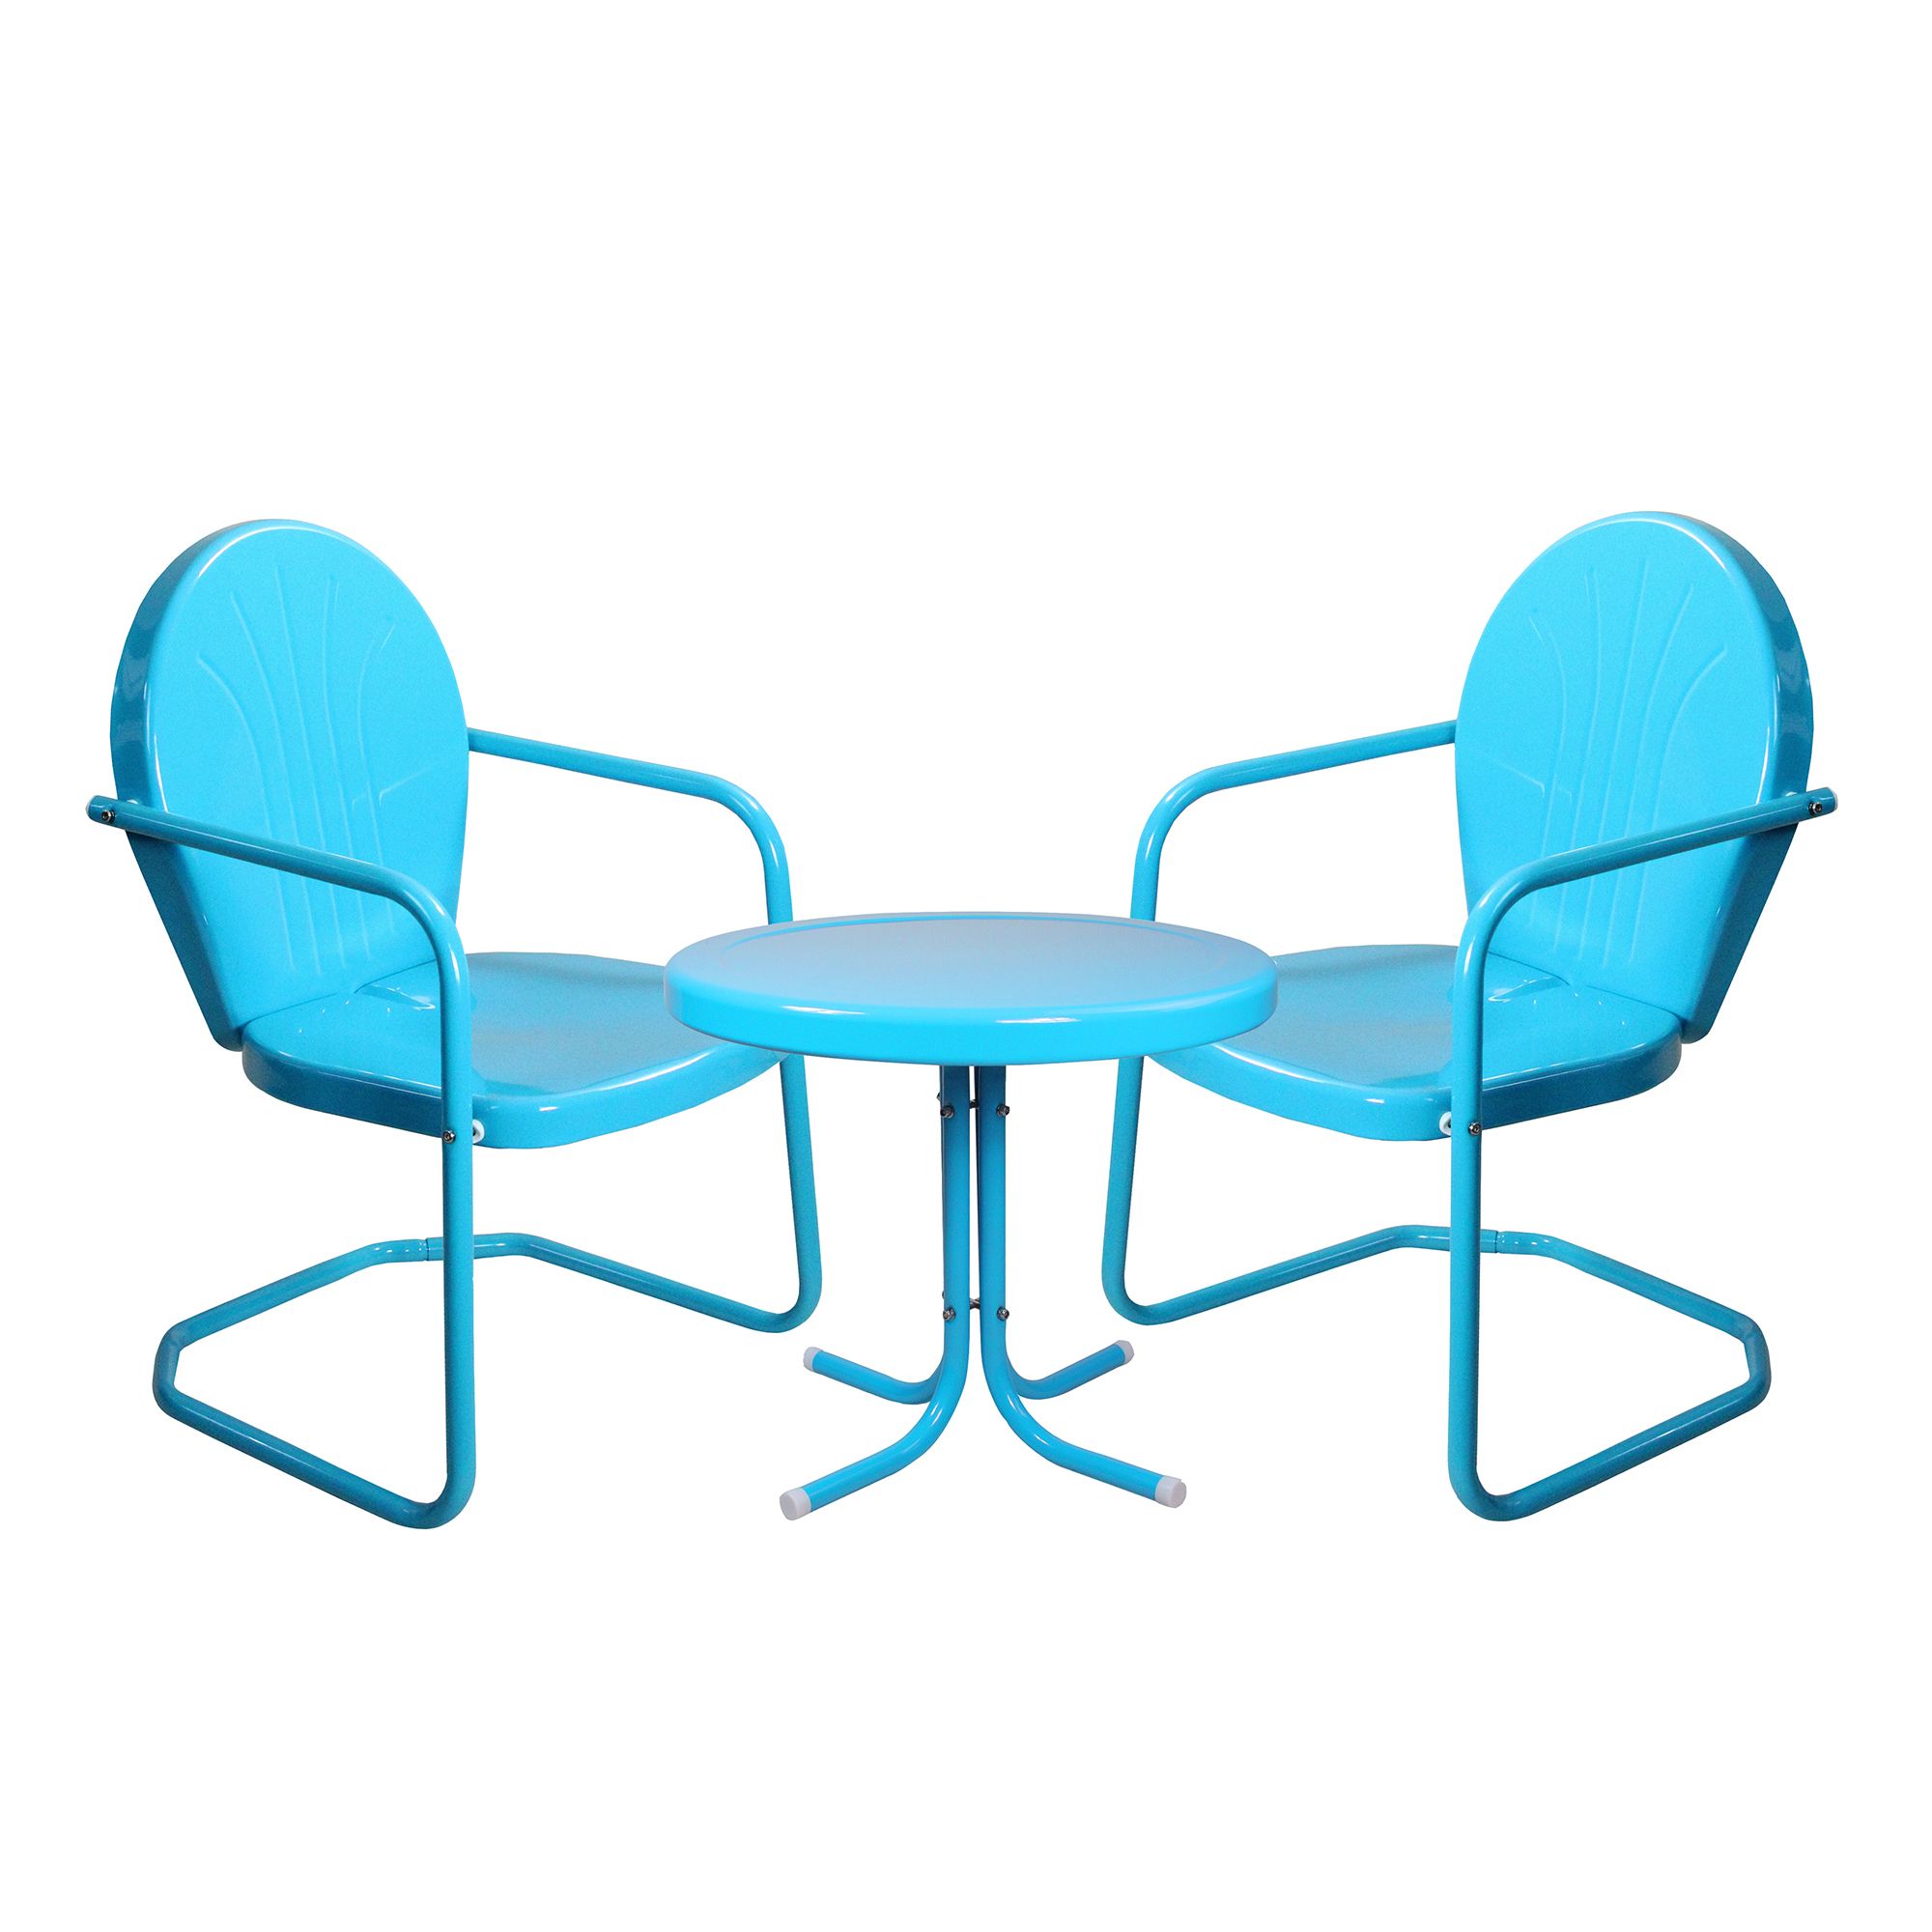 3 Piece Retro Metal Tulip Chairs And Side Table Outdoor Set, Turquoise Throughout Blue 3 Piece Outdoor Seating Sets (View 12 of 15)